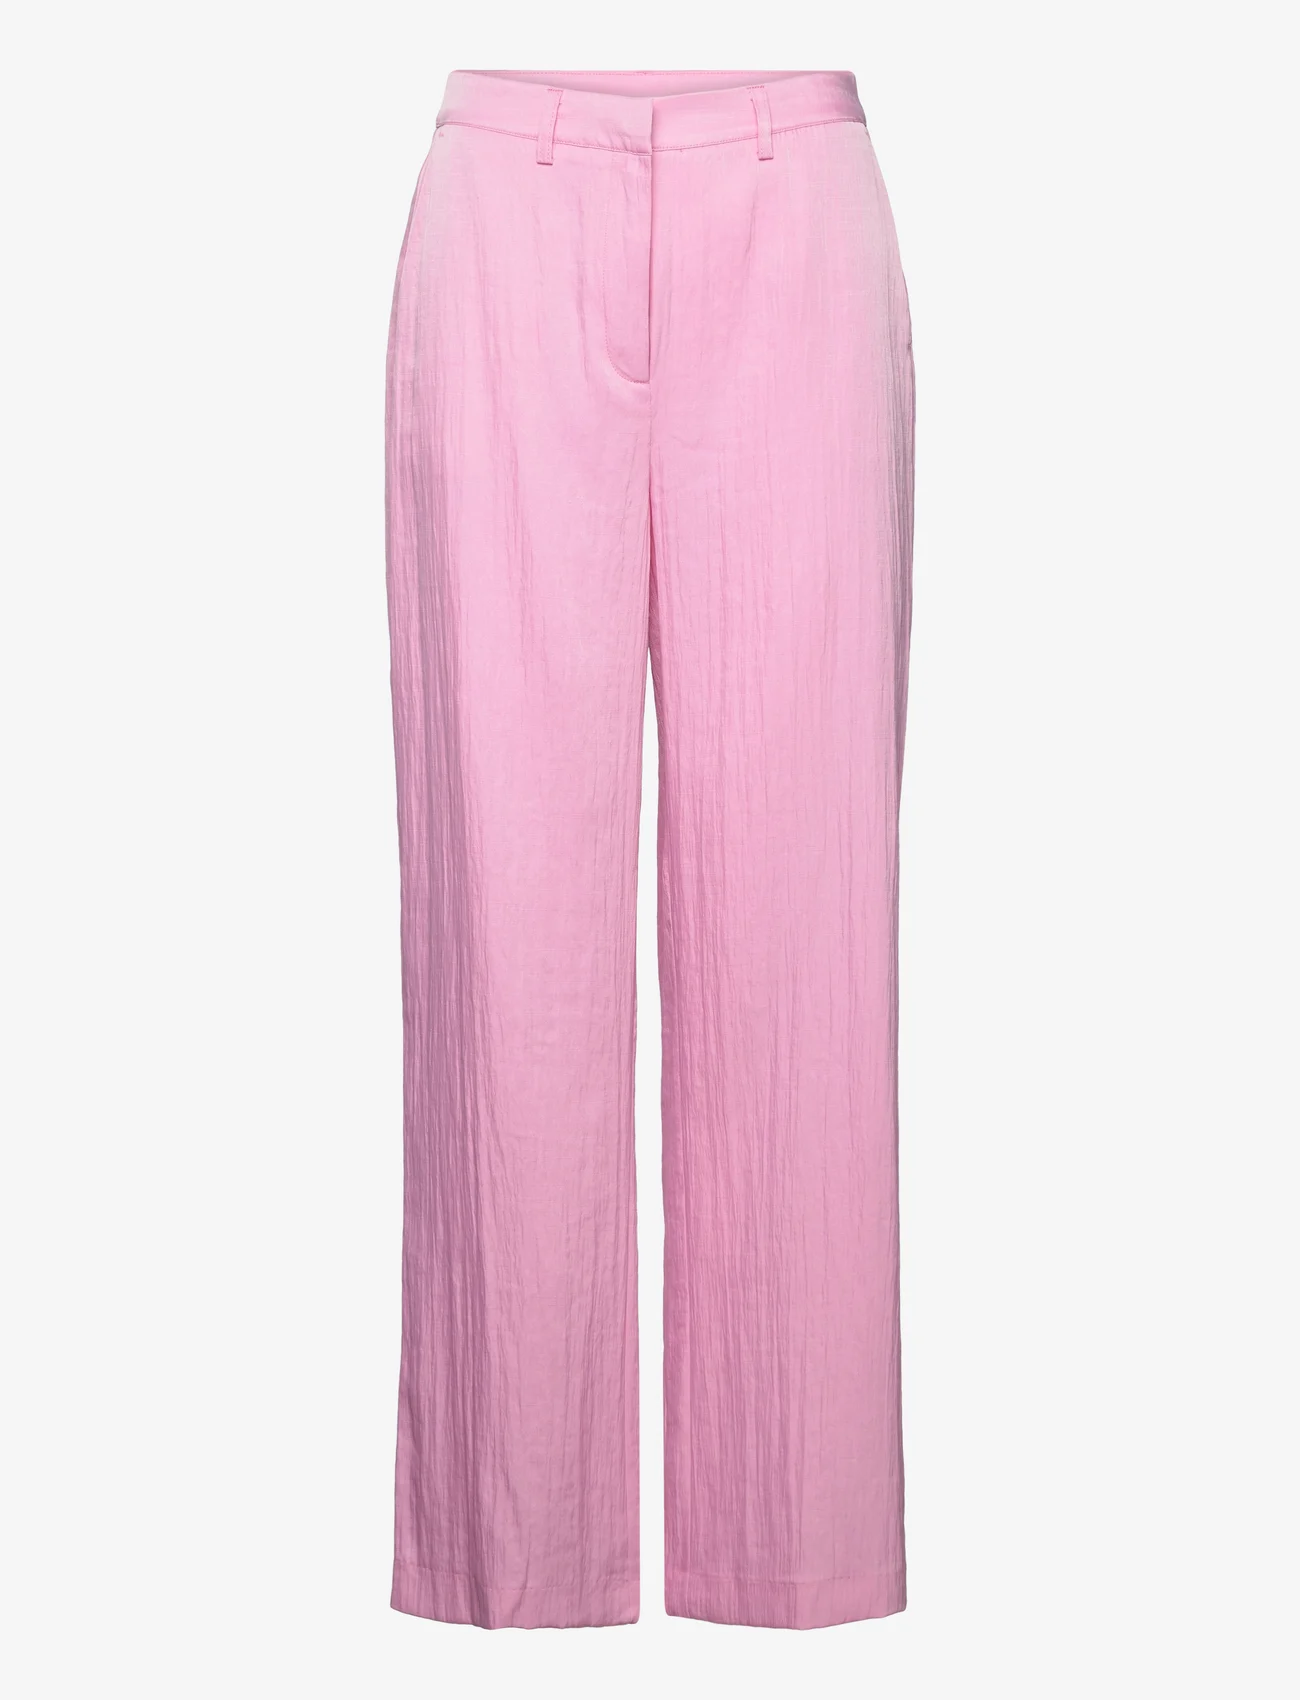 Nümph - NURACHEL PANTS - party wear at outlet prices - begonia pink - 0